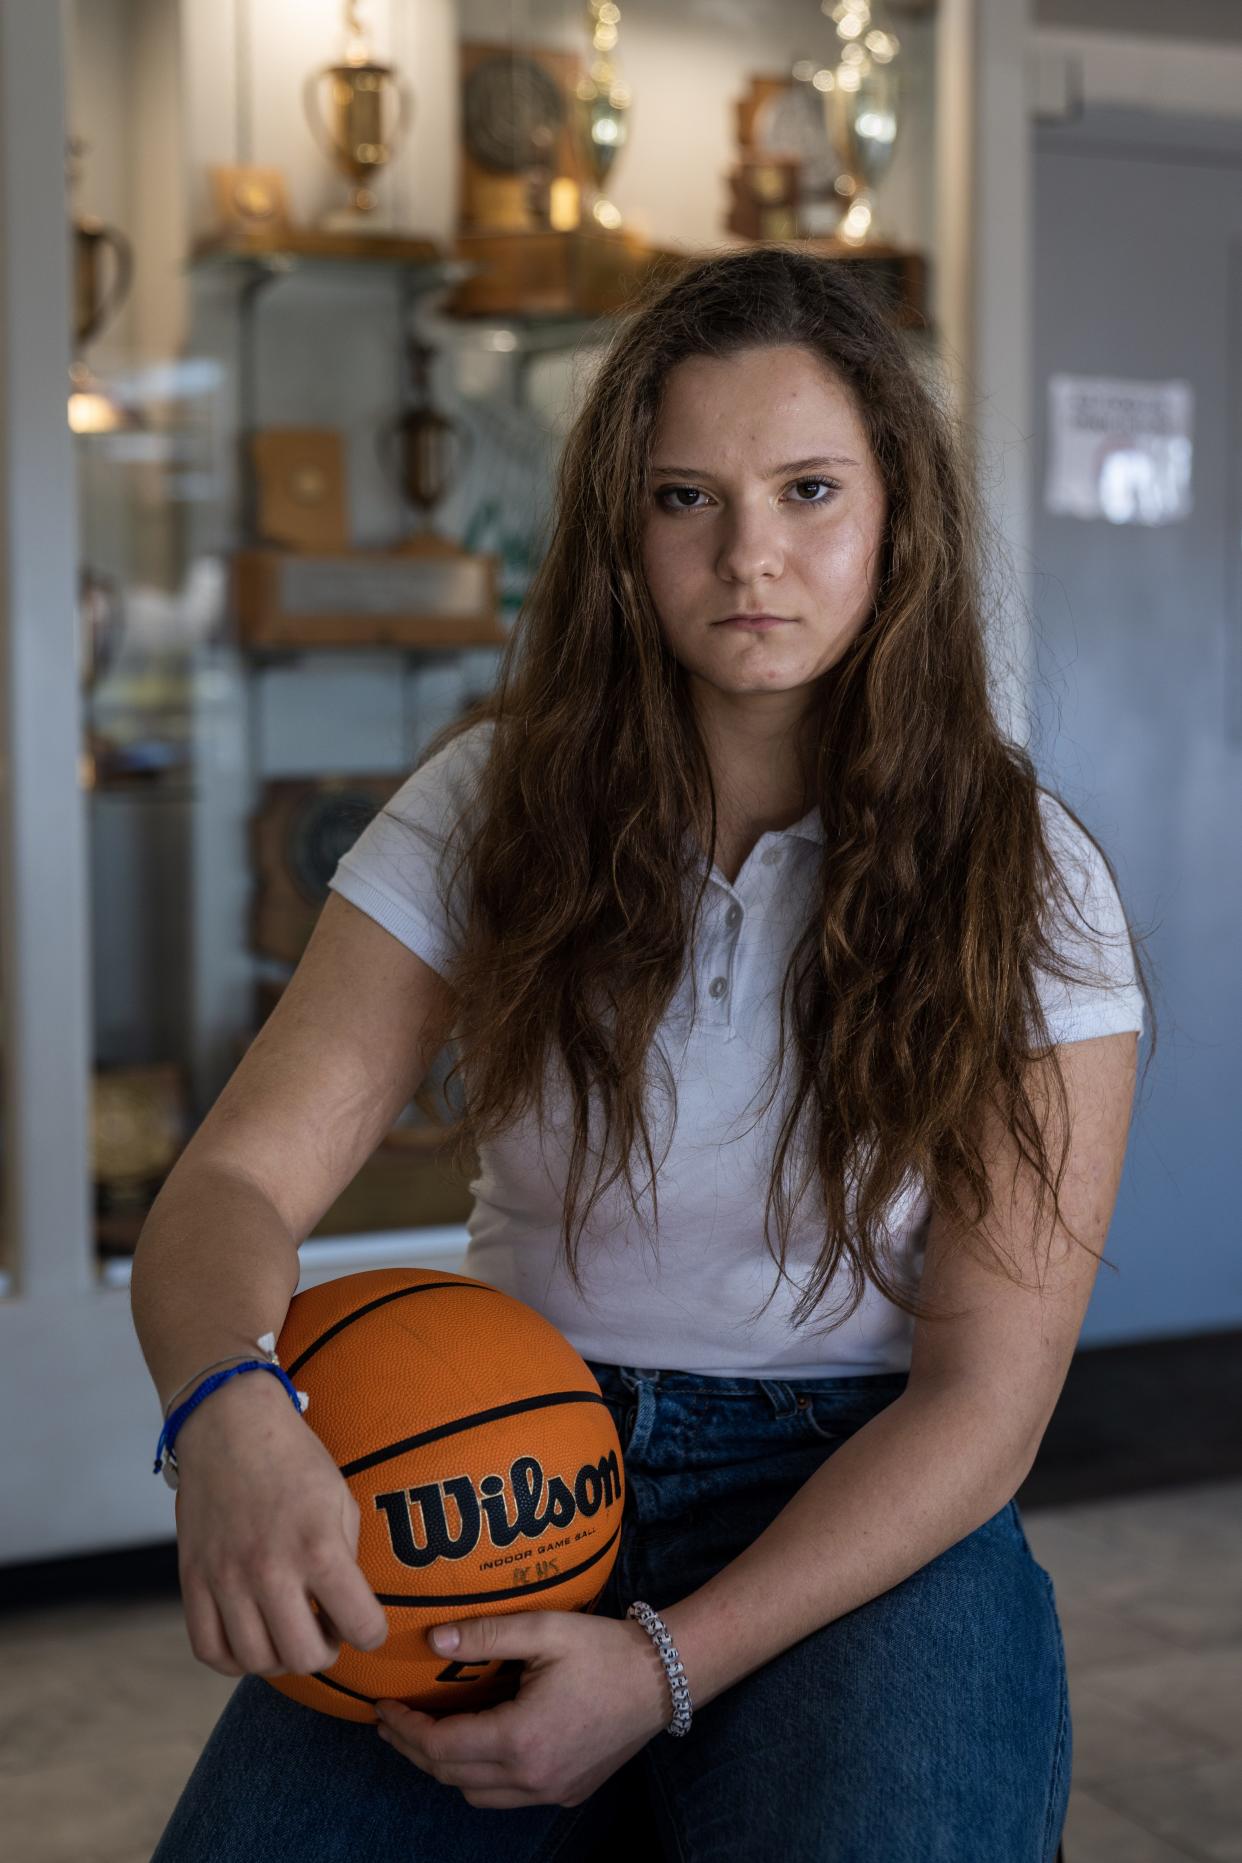 Sasha Danyliuk poses for a portrait at Phoenix Christian Preparatory School on Wednesday, Jan. 4, 2023, in Phoenix. Danyliuk, a refugee from Ukraine, is unable to play on the schools varsity basketball team due to AIA international transfer rules.